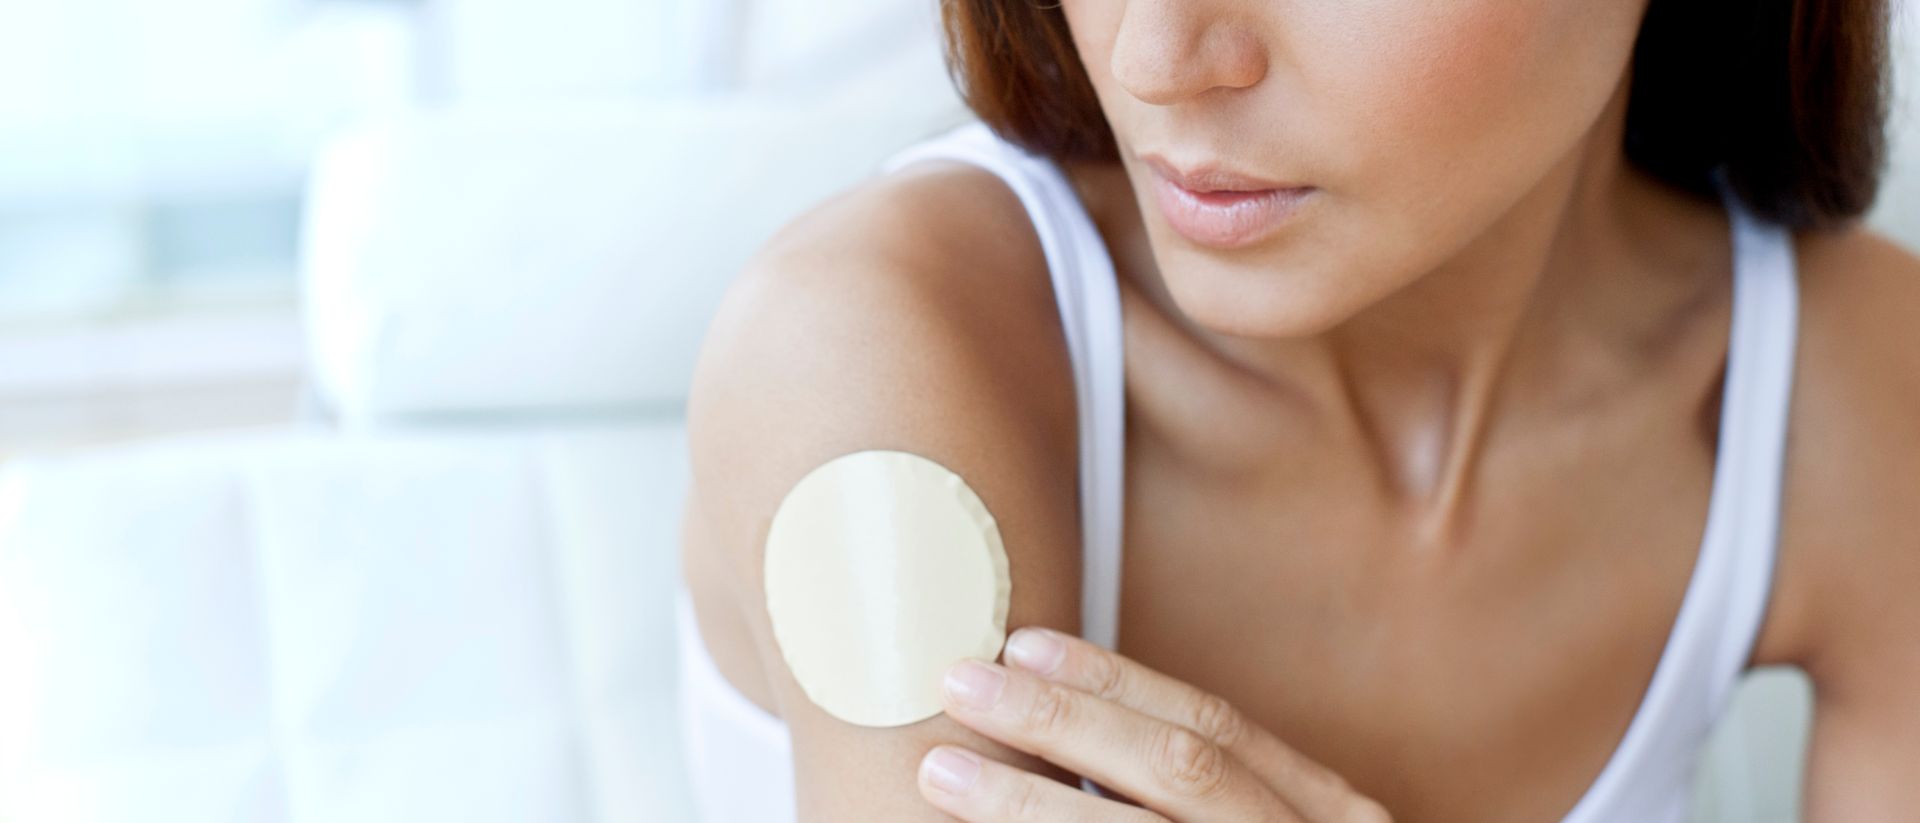 A young woman attaches a smart health patch to her right upper arm.